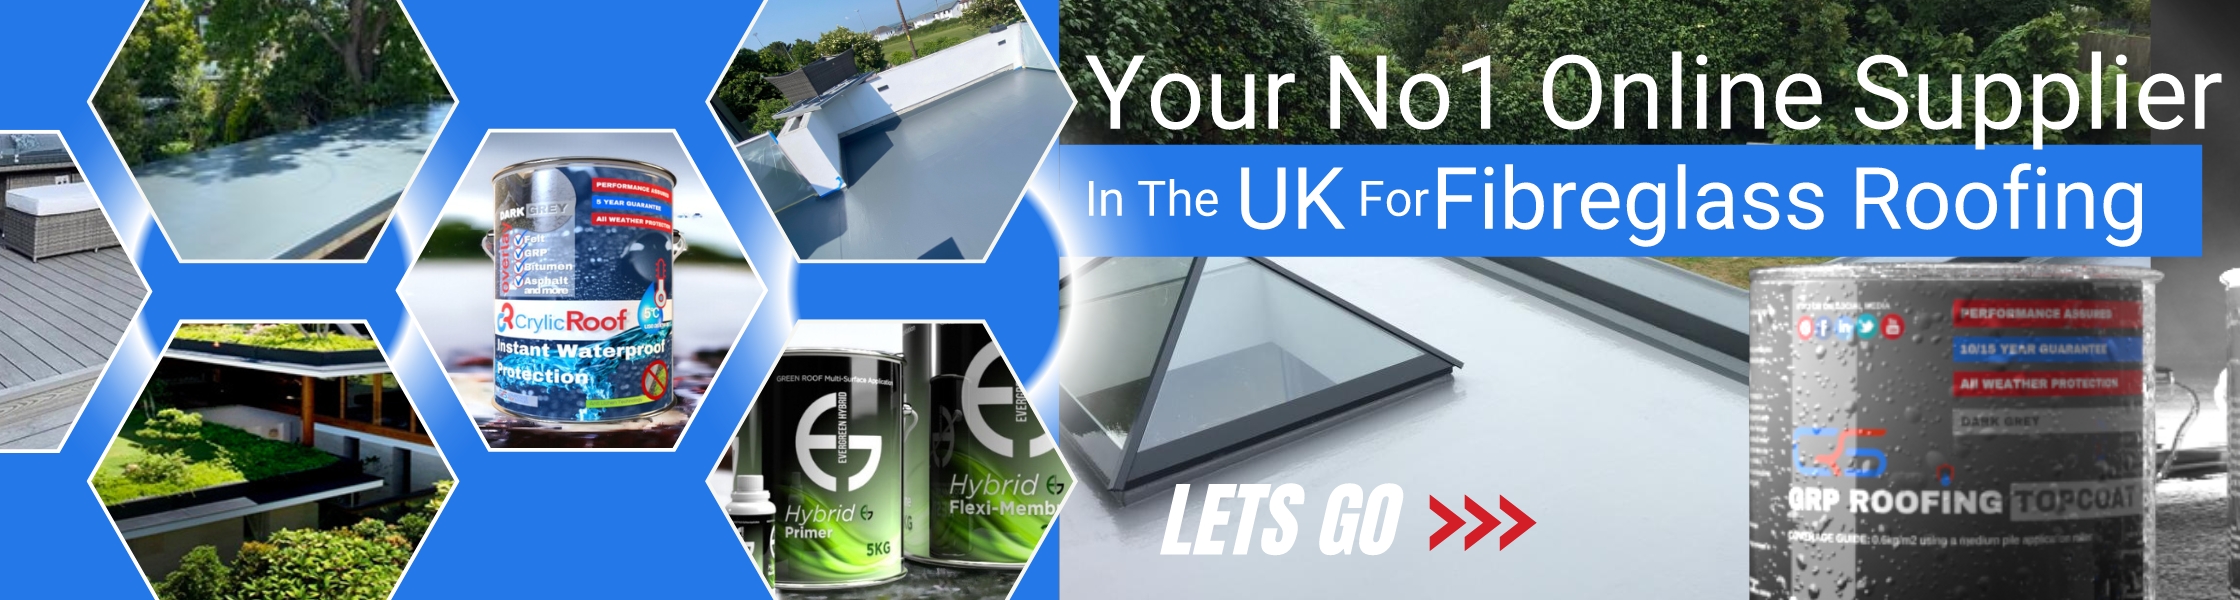 grp roofing kits